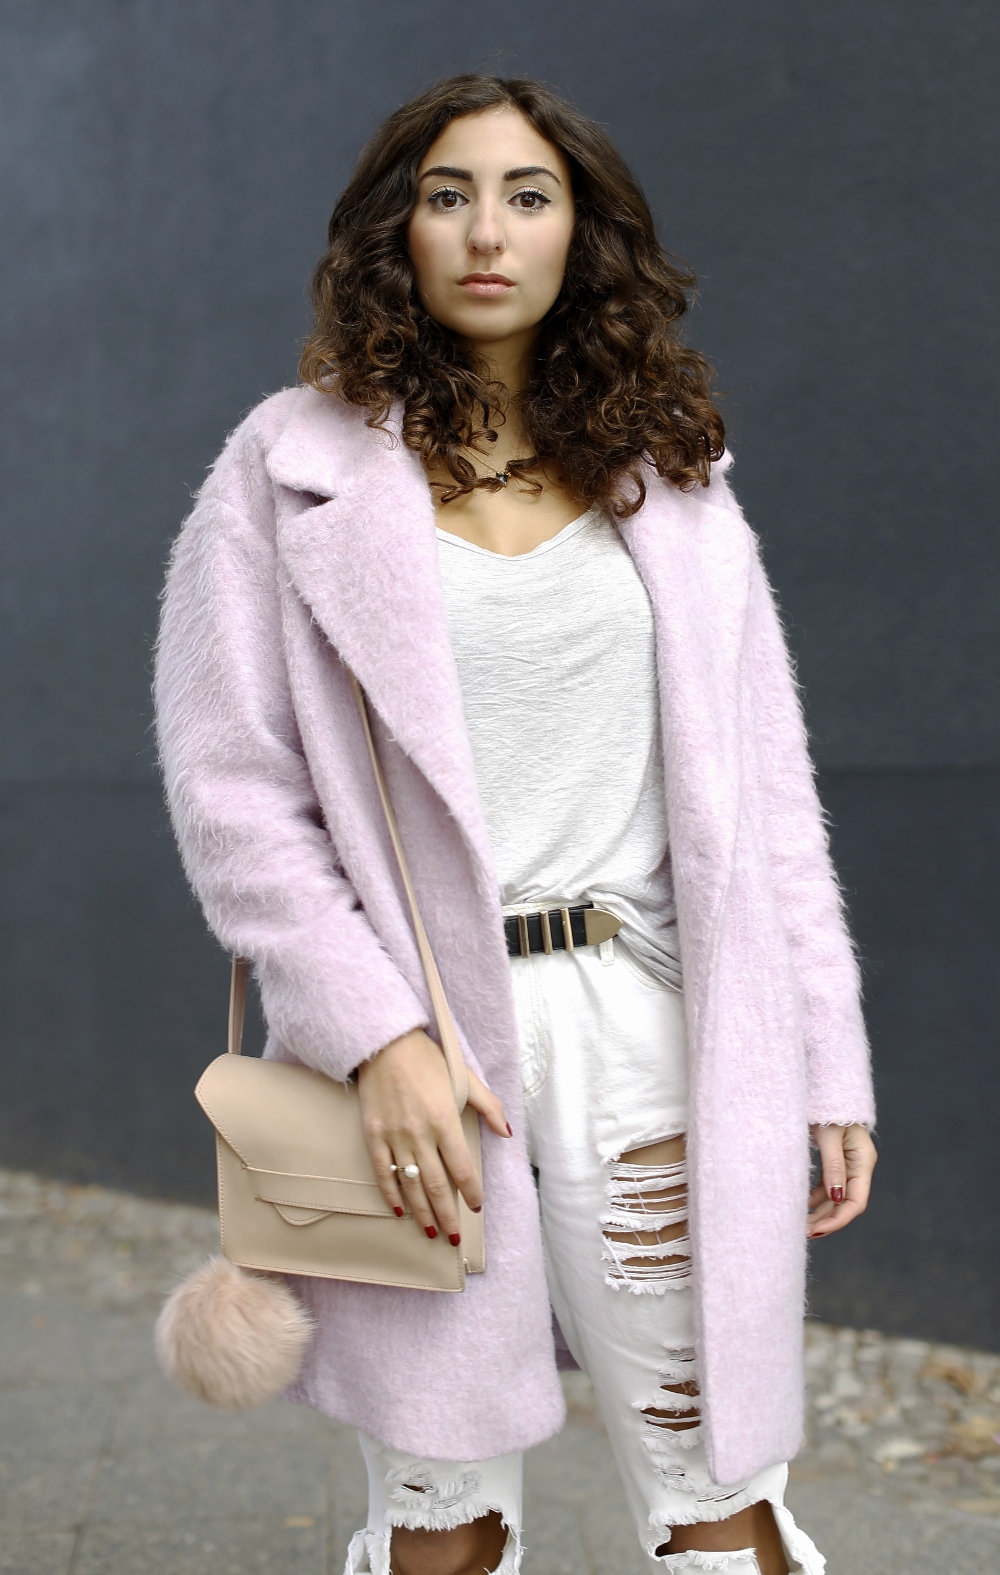 Fluffy Pink Oversize Coat Bershka White Ripped Boyfriend Jeans Justfab Jeans Pants Nude Mango Bag Grey pointed boots h&M streetstyle fashionblog modeblog blogger look outfit berlin germany deutschland winter look samieze